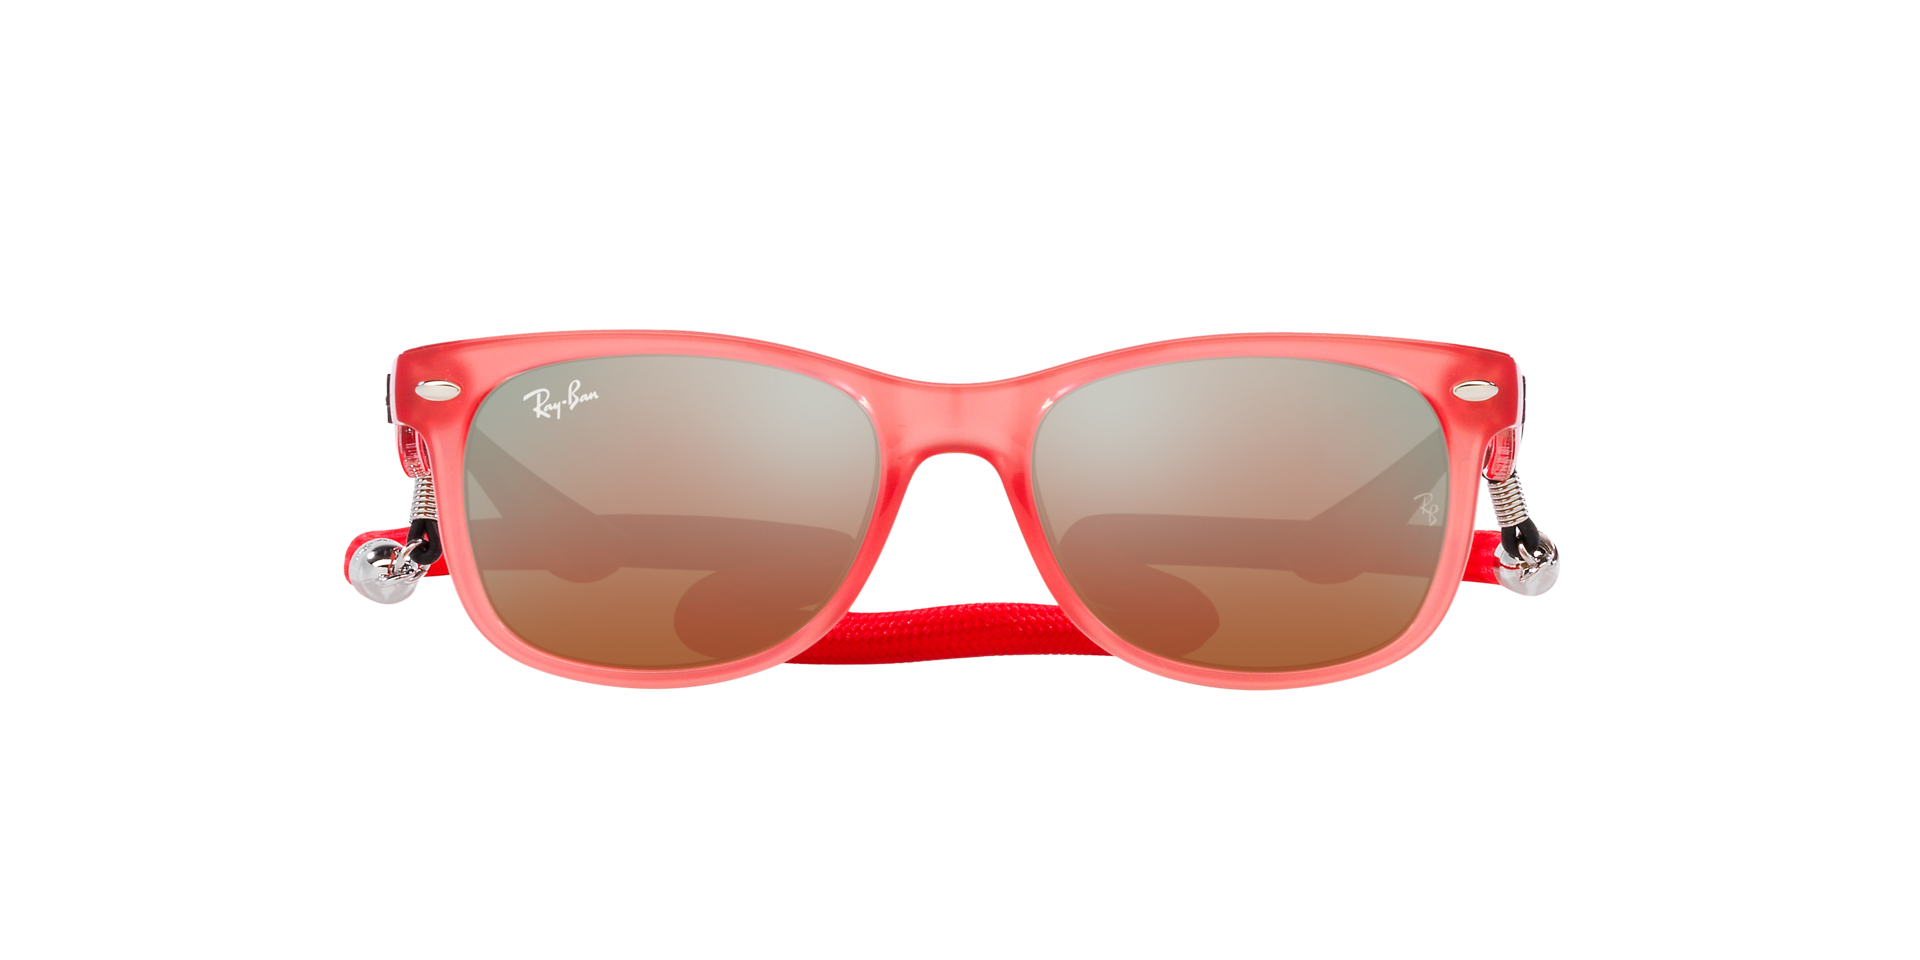 Toddler Ray Ban's classic sunglasses - Accessories